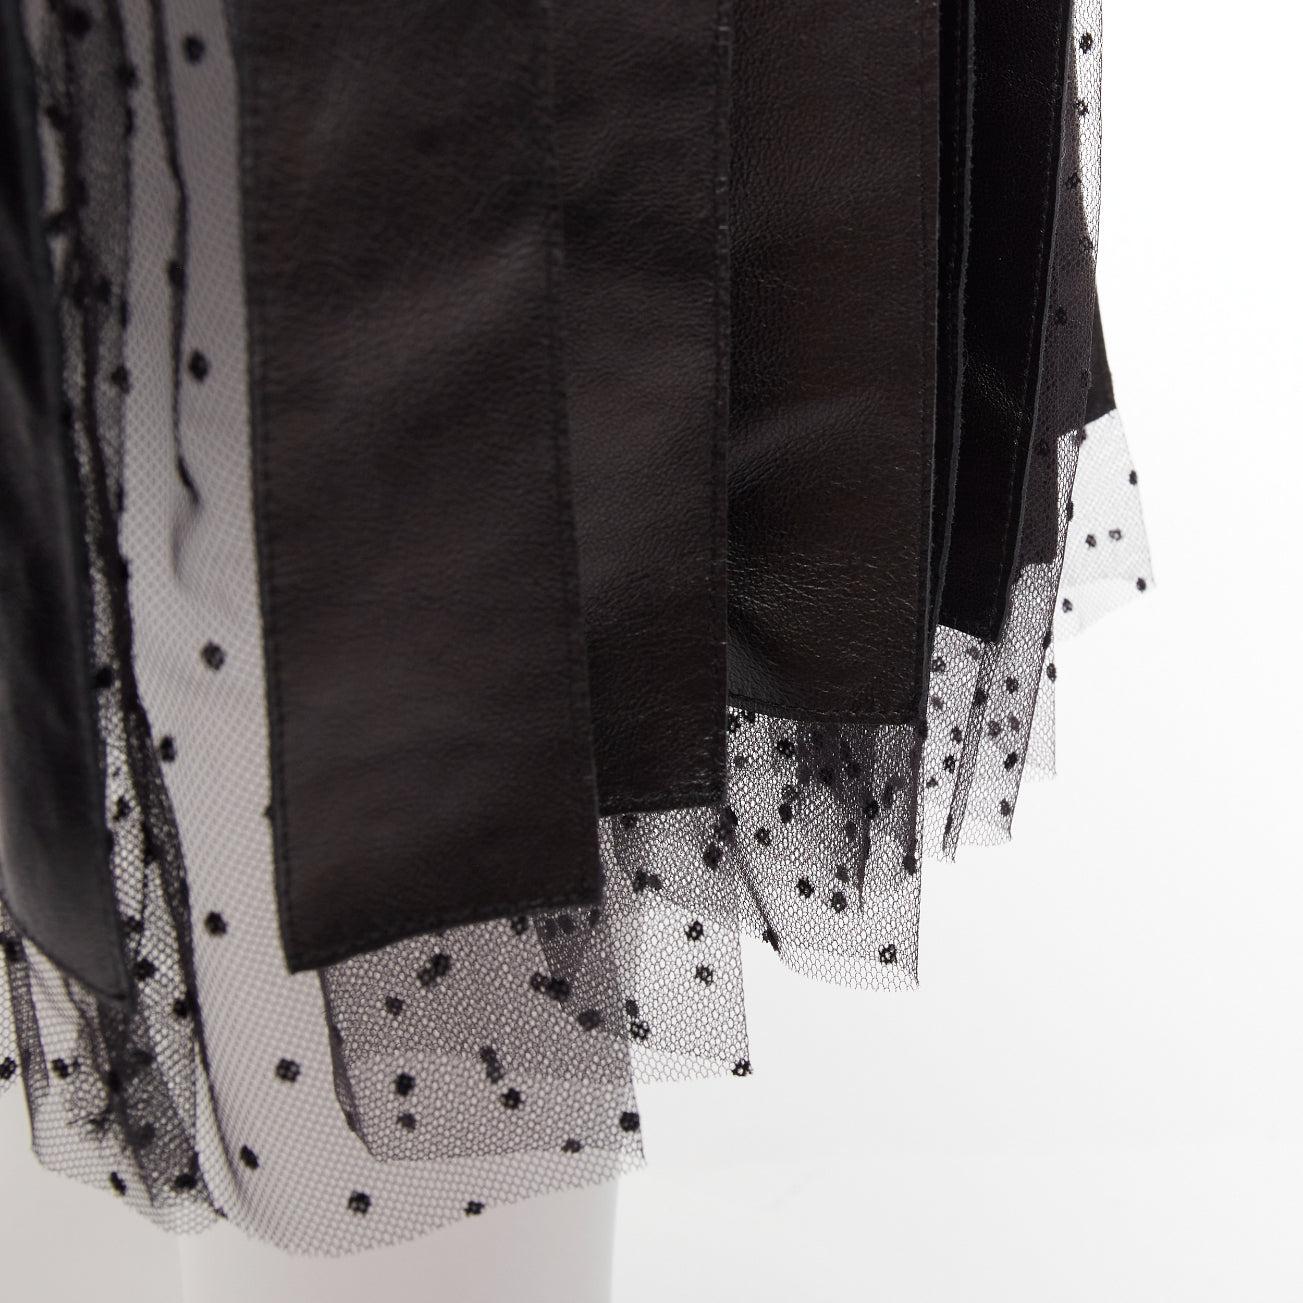 CHRISTIAN DIOR black lambskin leather polka dot lace tulle pleated skirt FR36 S
Reference: AAWC/A00847
Brand: Dior
Designer: Maria Grazia Chiuri
Material: Leather, Tulle
Color: Black
Pattern: Polka Dot
Closure: Snap Buttons
Lining: Black Silk
Extra